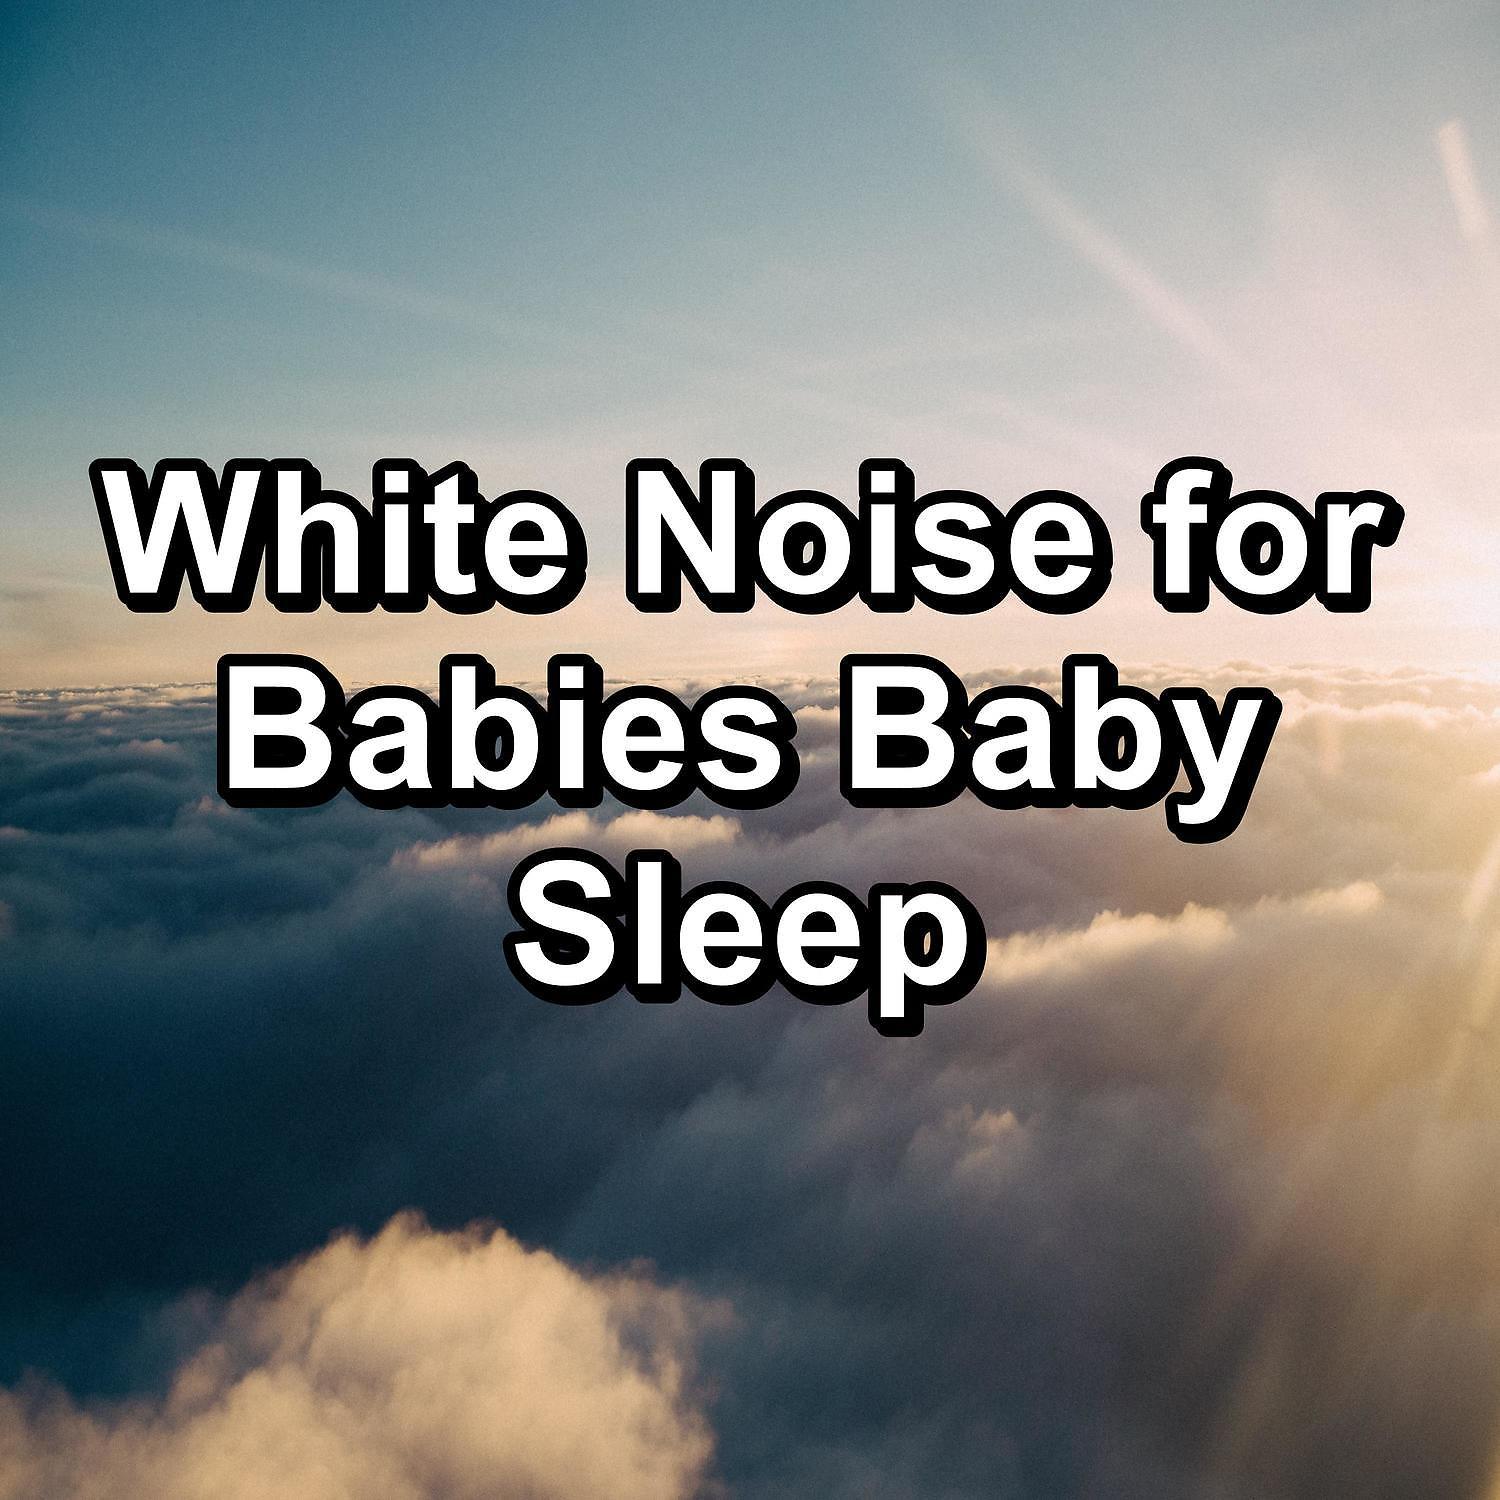 White Noise Sound, Brown Noise Sound, Pink Noise Sound - Medium White Noise Sleep Therapy For a Peaceful Night